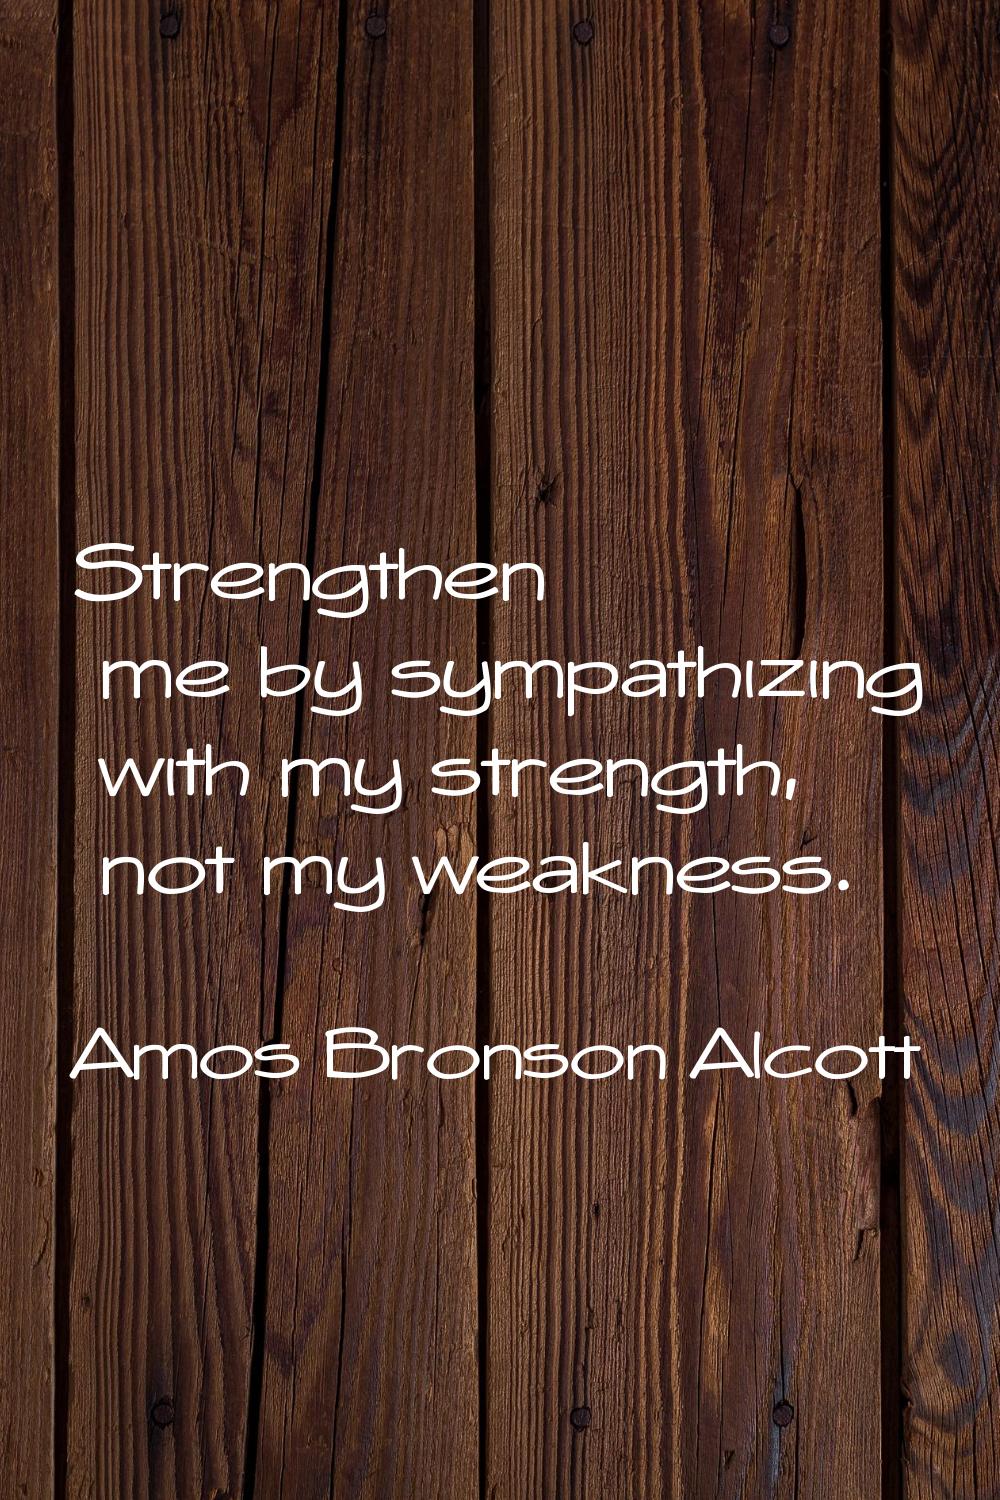 Strengthen me by sympathizing with my strength, not my weakness.